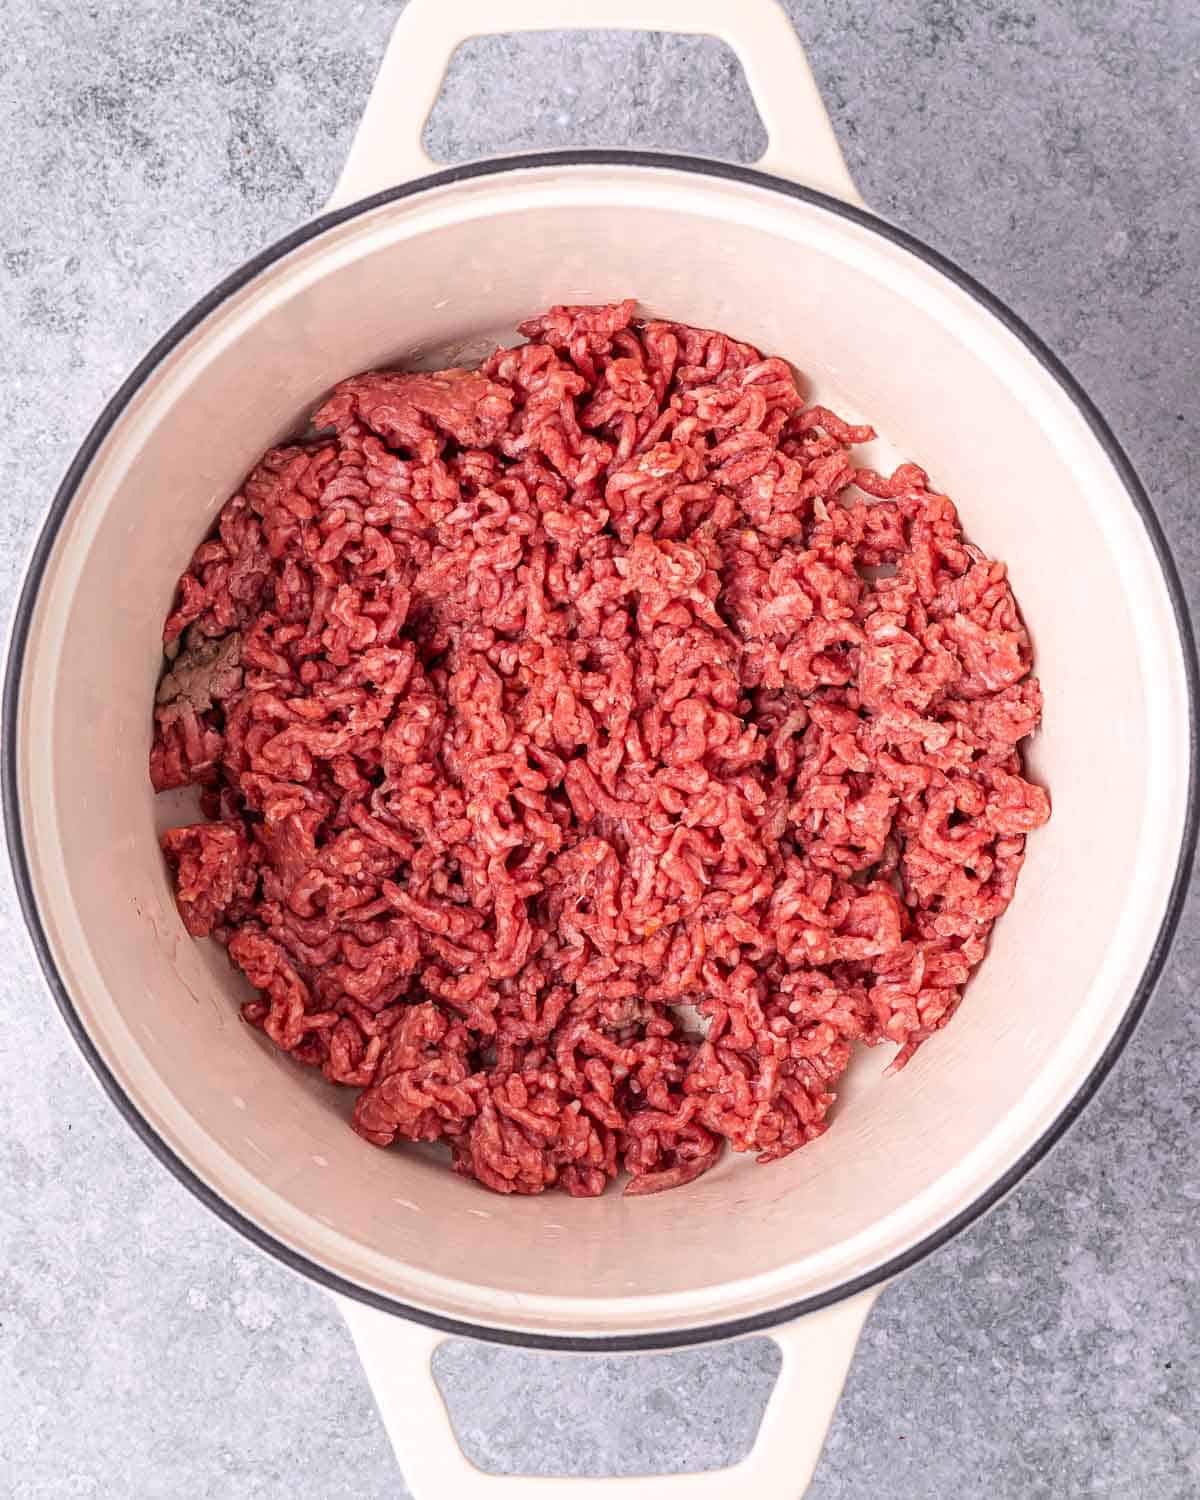 Browning ground beef in a large pot.